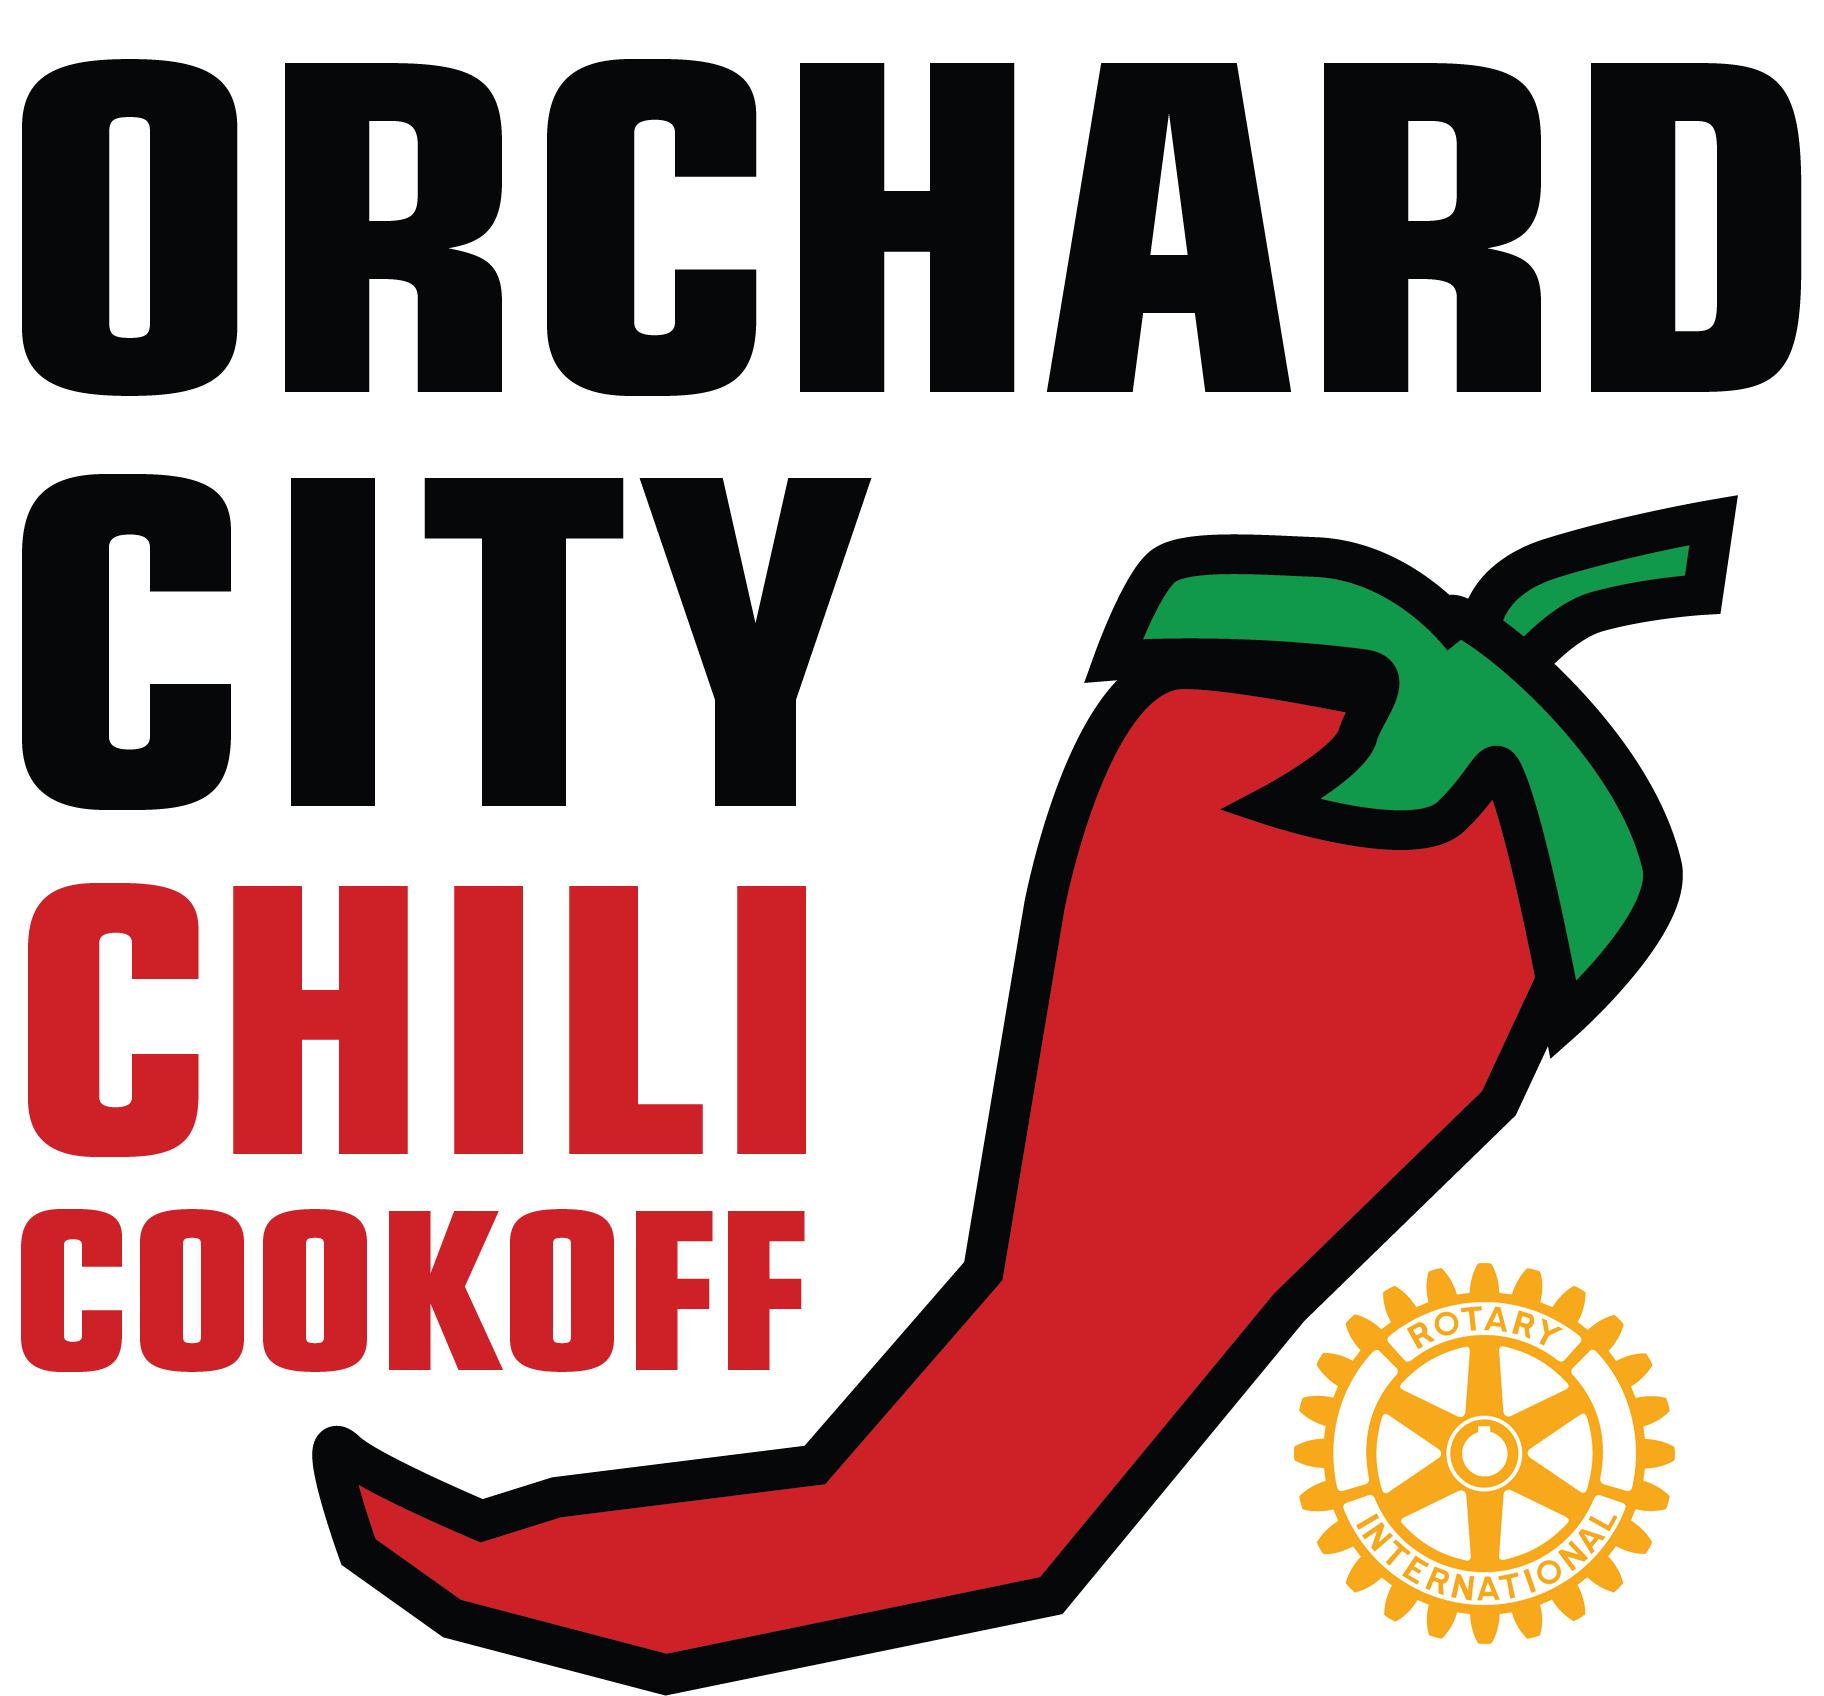 About our club rotary. Pepper clipart chili cook off